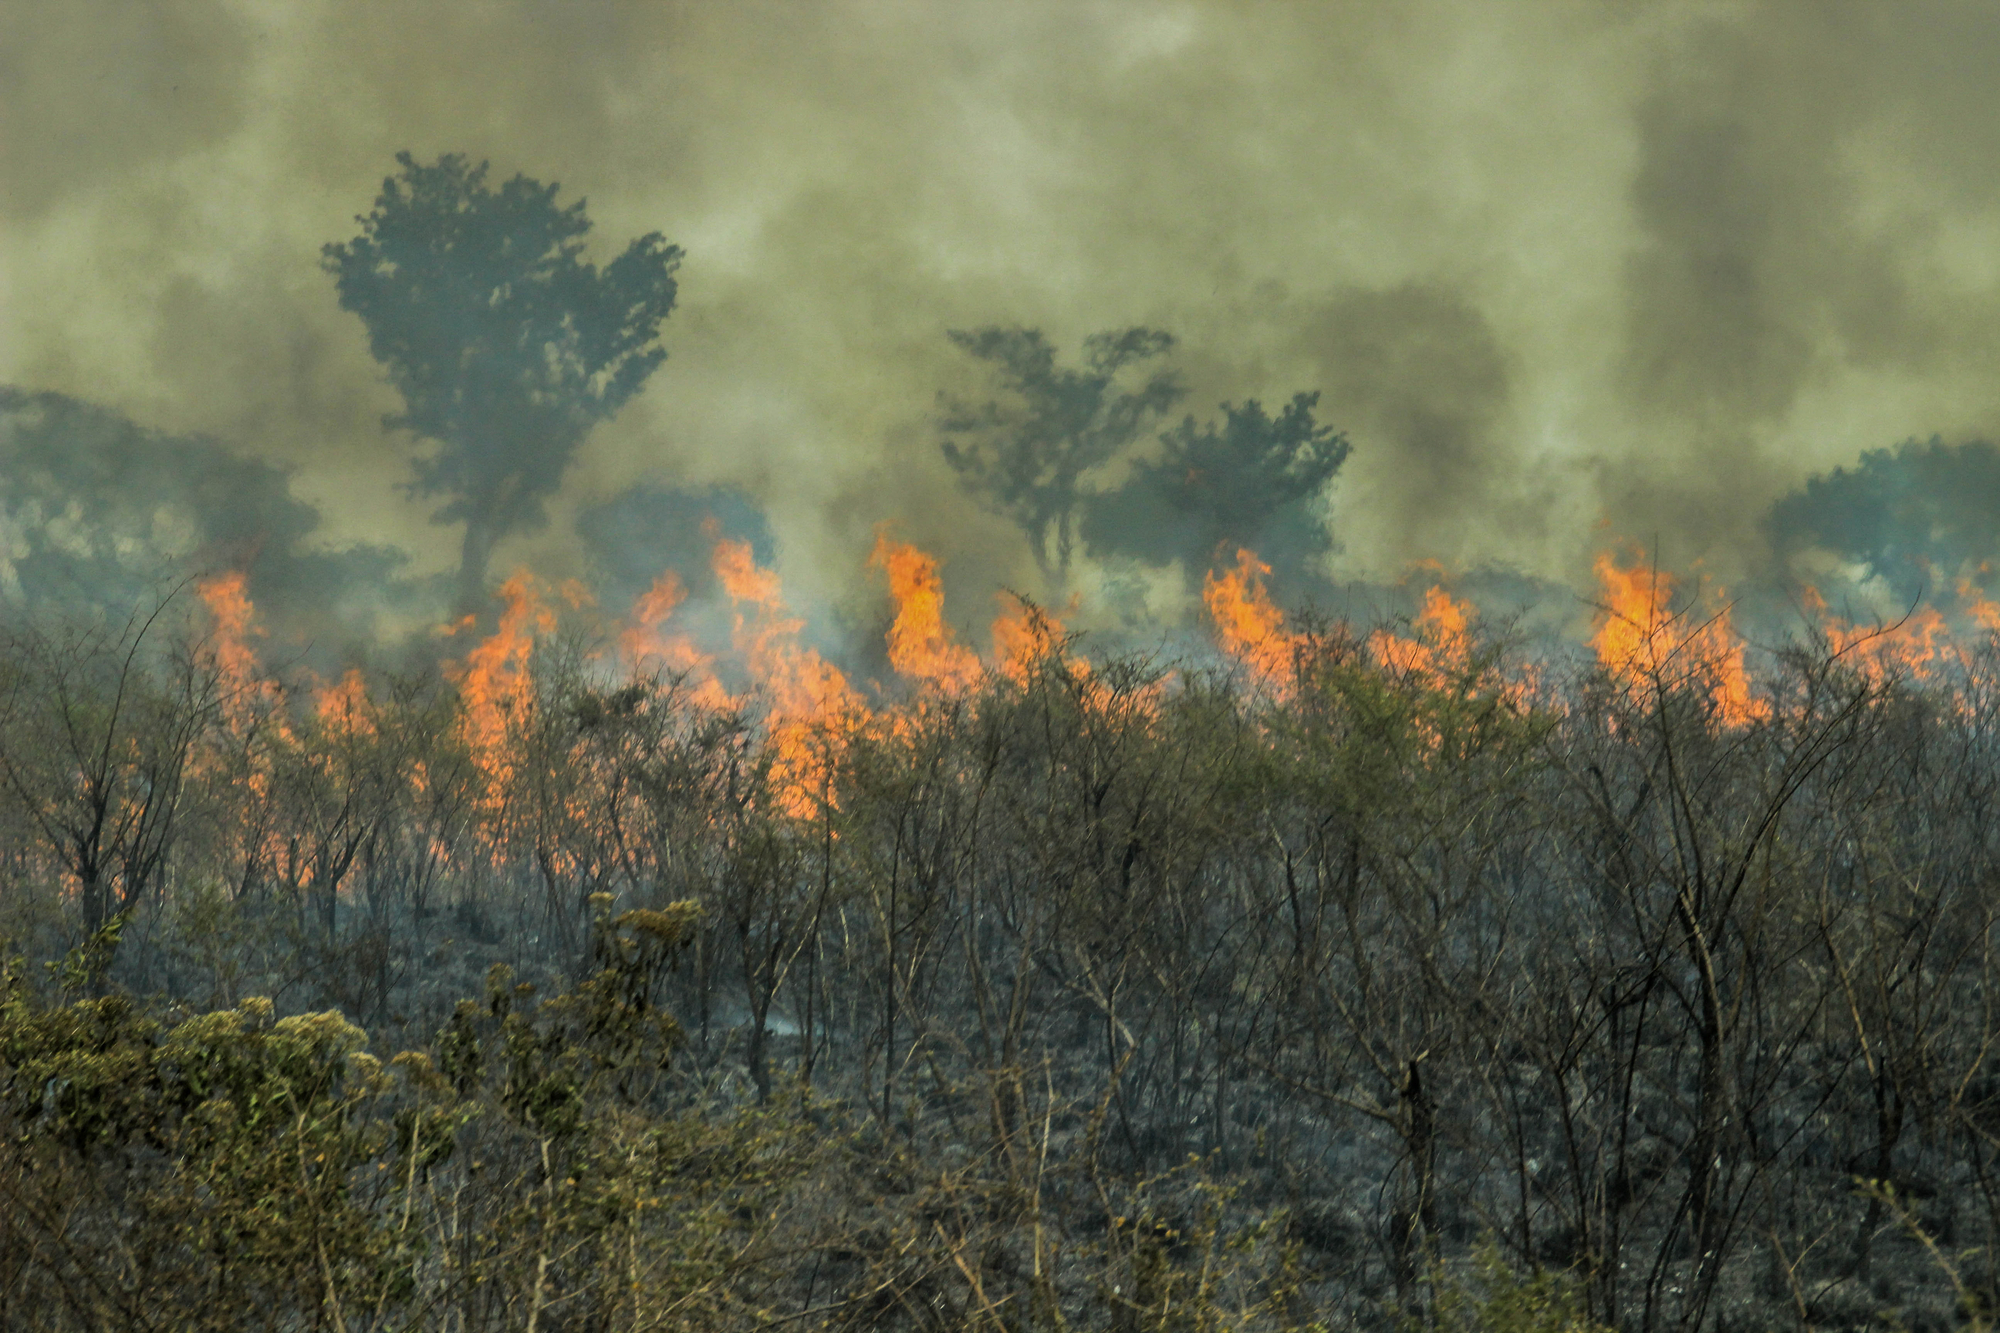 Fires in the Amazon forest - global climate change. Burning rainforest.